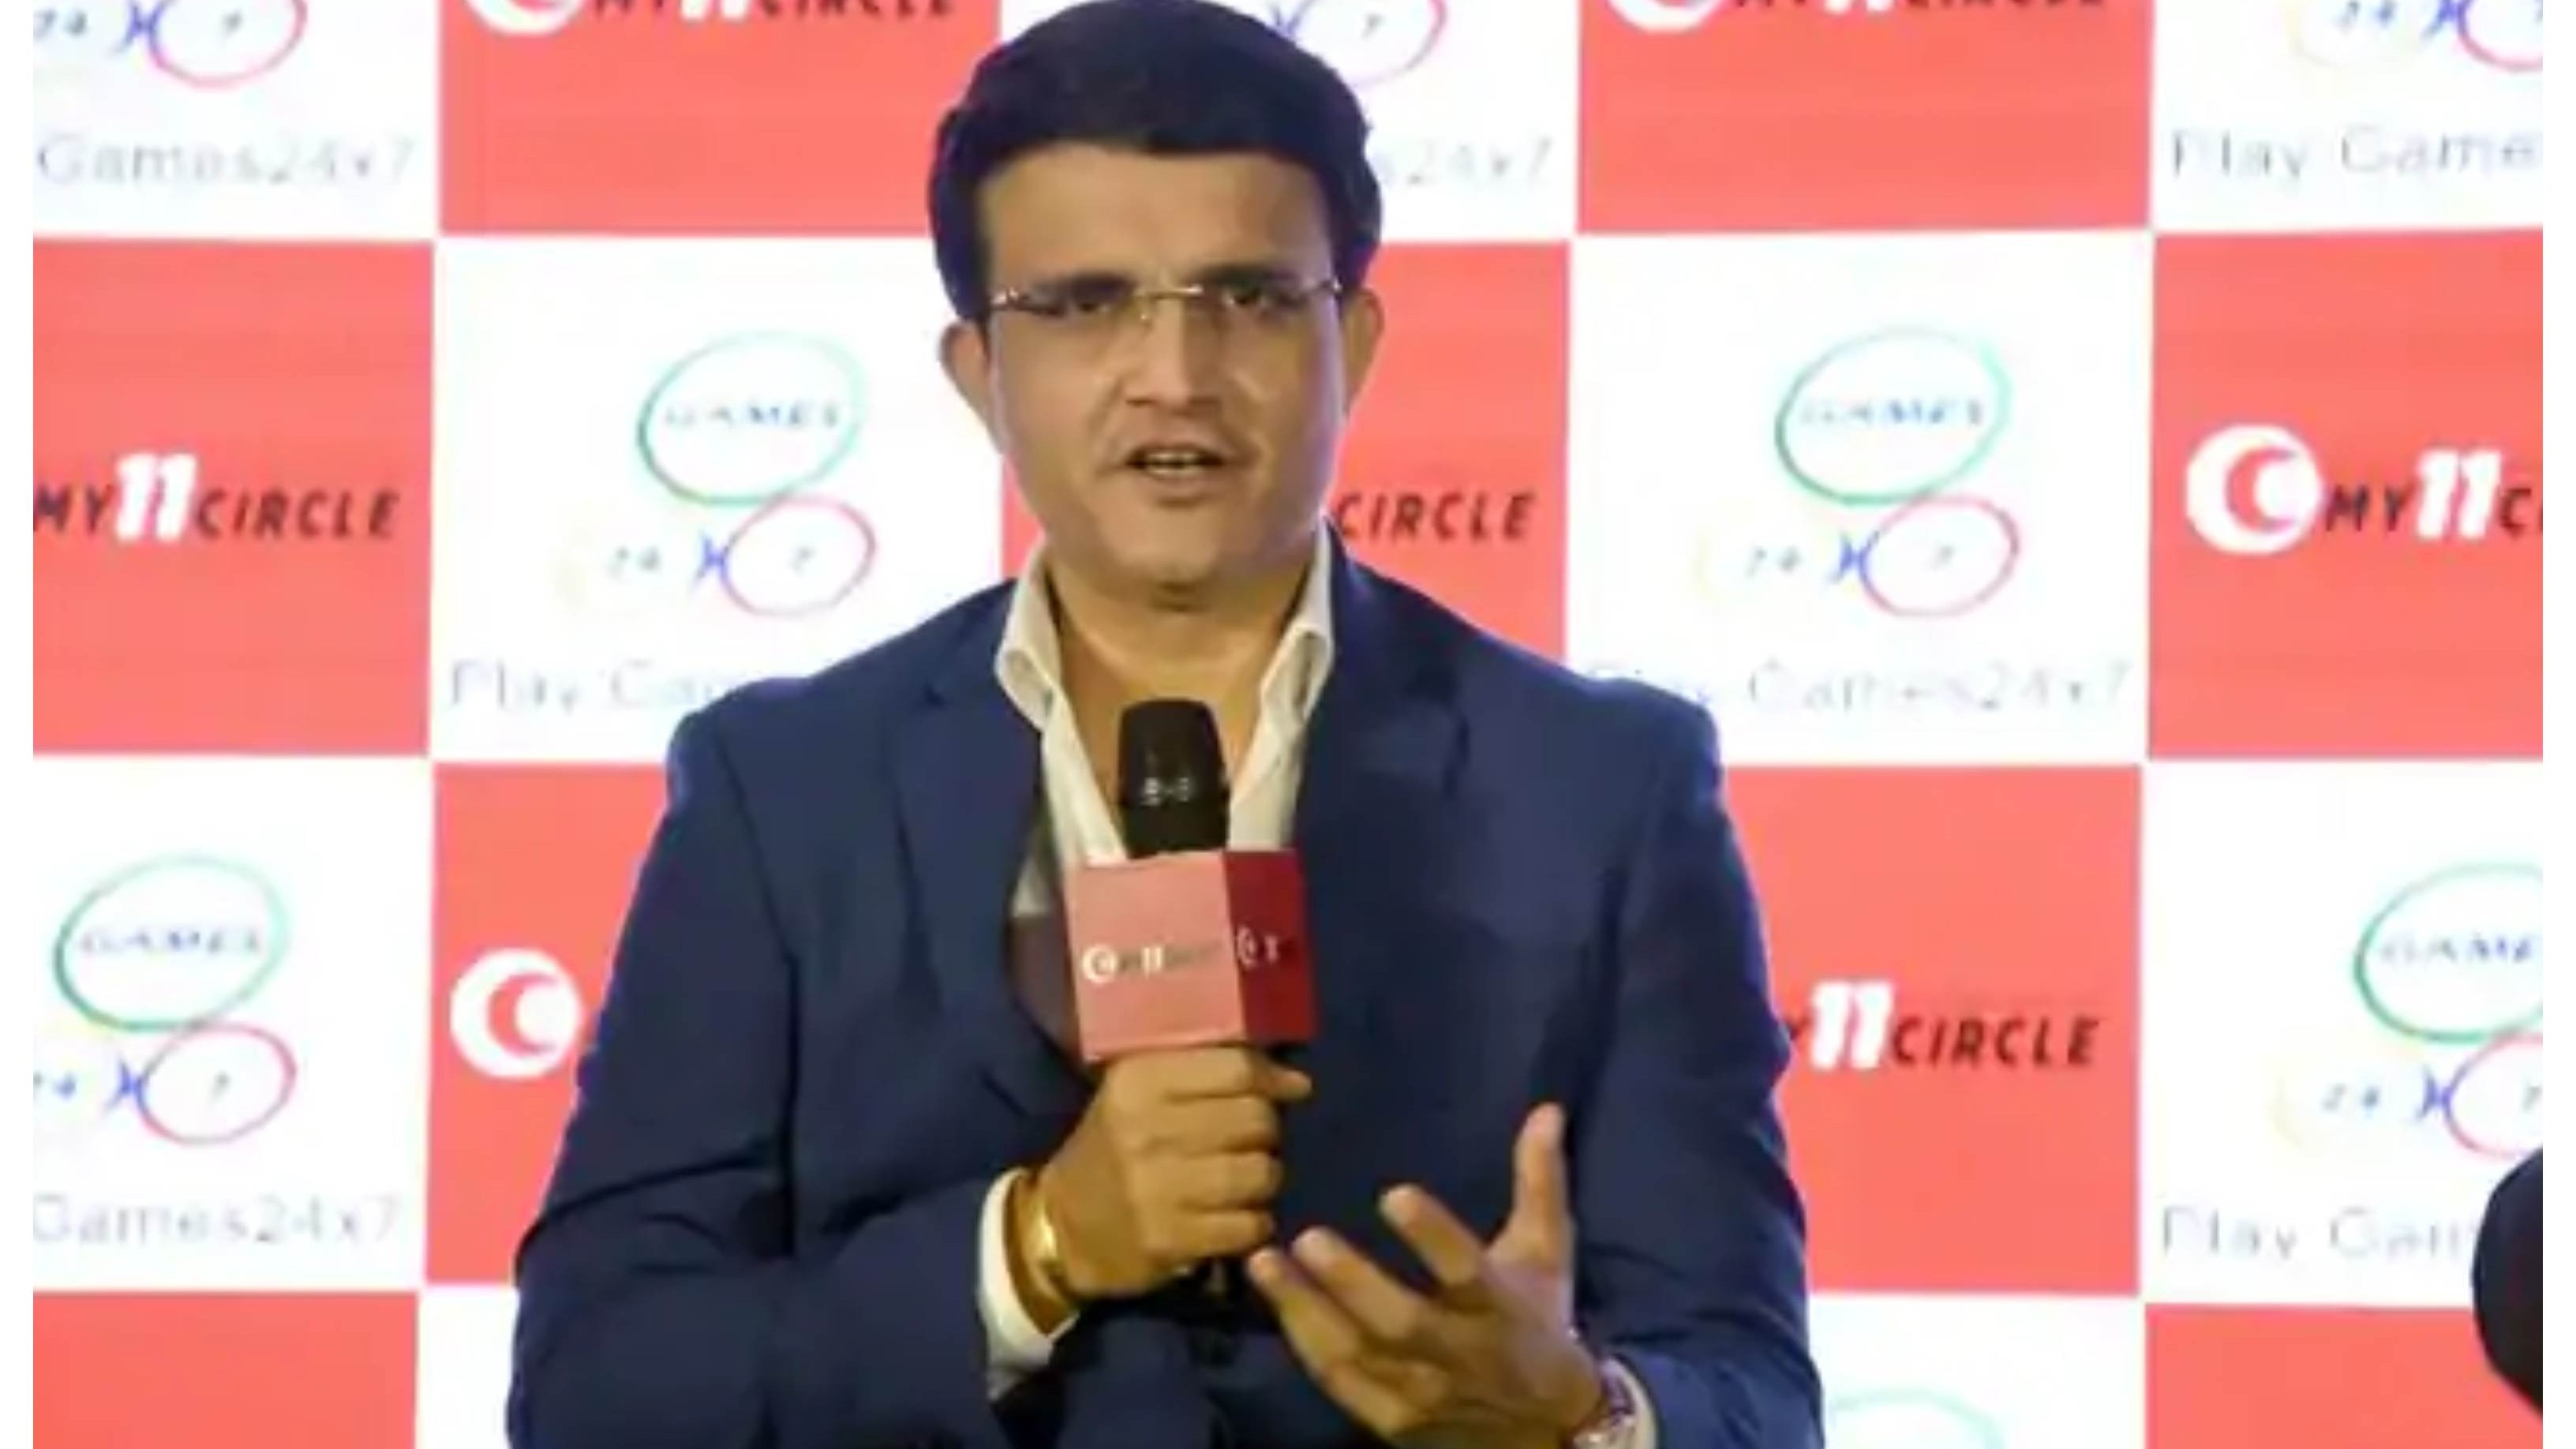 ‘We are not concerned about Sourav Ganguly’s personal endorsements’, says Dream11 co-founder